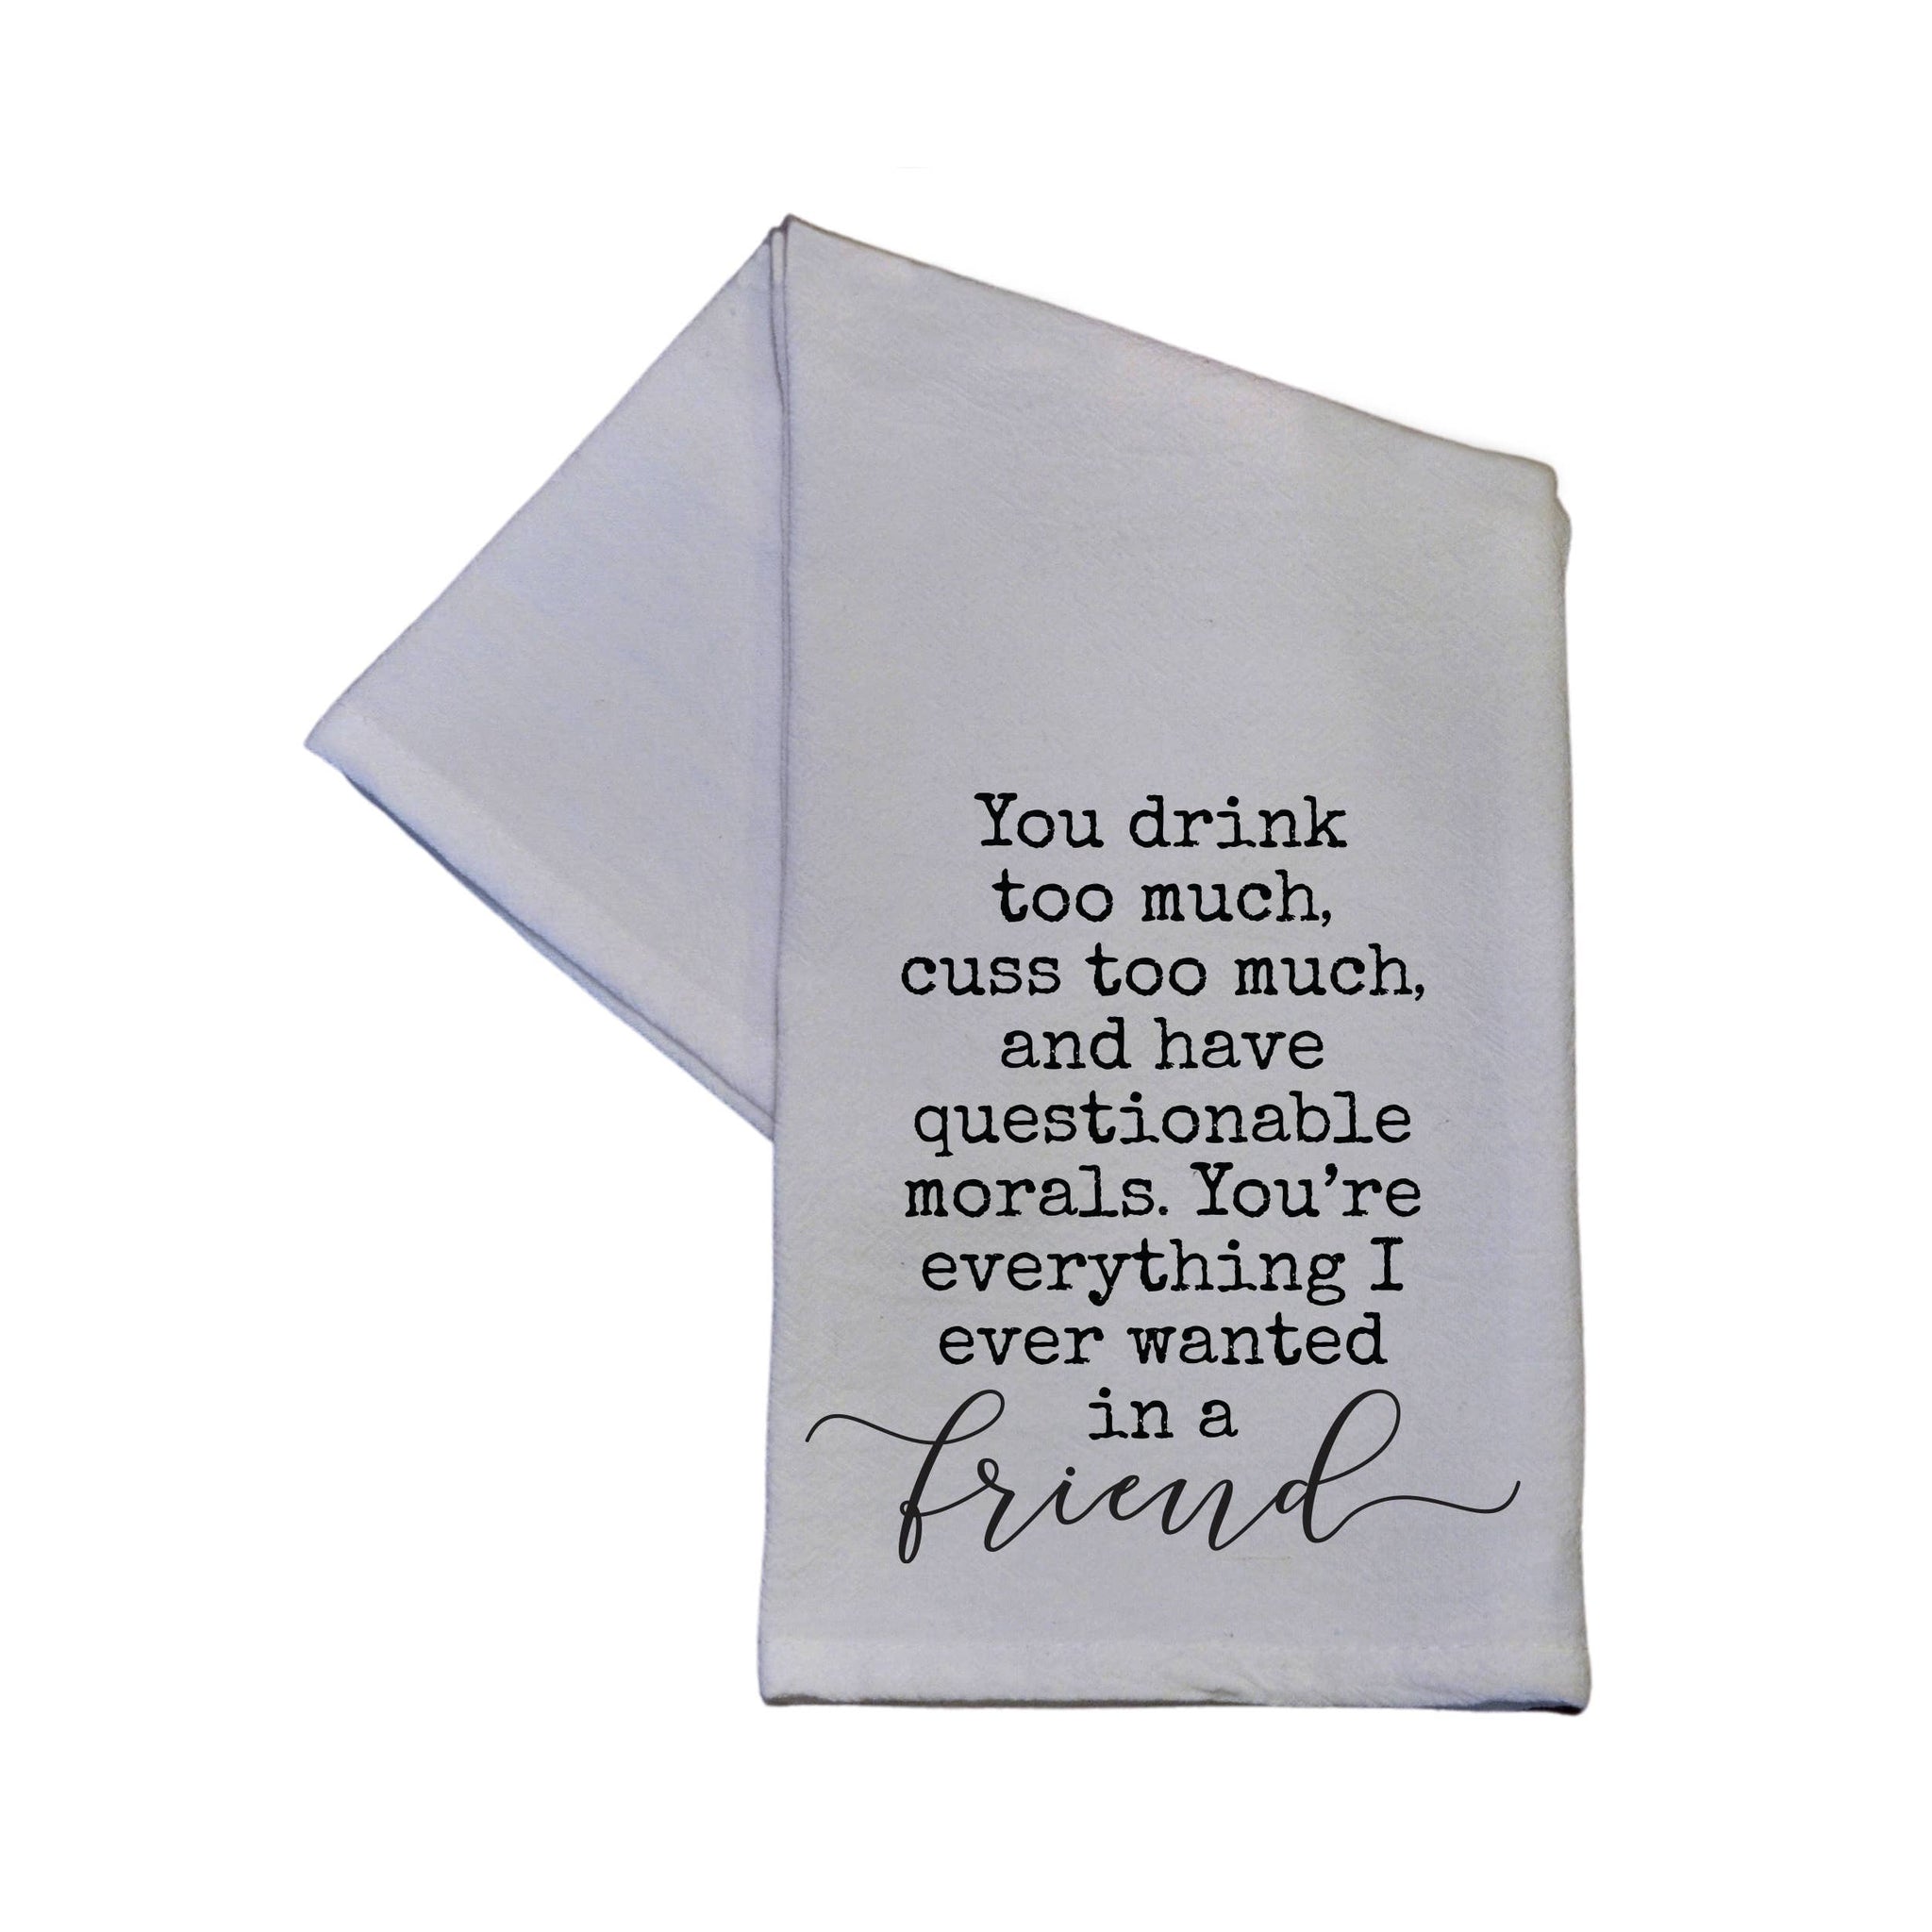 Driftless Studios - You Drink Too Much You Cuss Too
Much Cotton Hand Towel 16x24